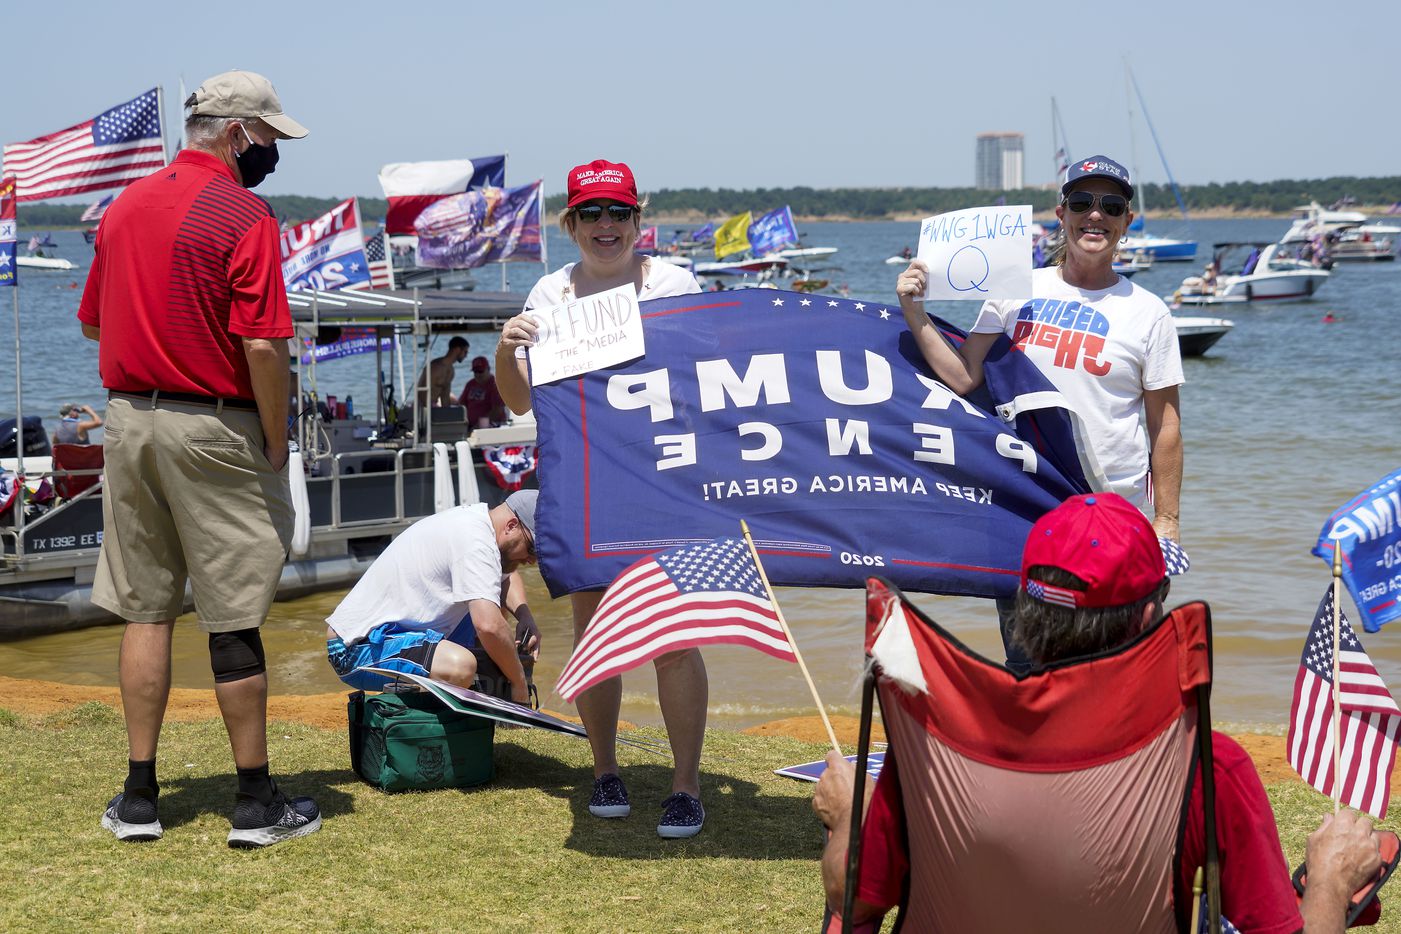 Supporters of President Donald Trump pose for photos holding signs in support of QAnon, and in opposition to the media, during a campaign rally and boat parade at Oak Grove Park on Grapevine Lake on Saturday, Aug. 15, 2020.